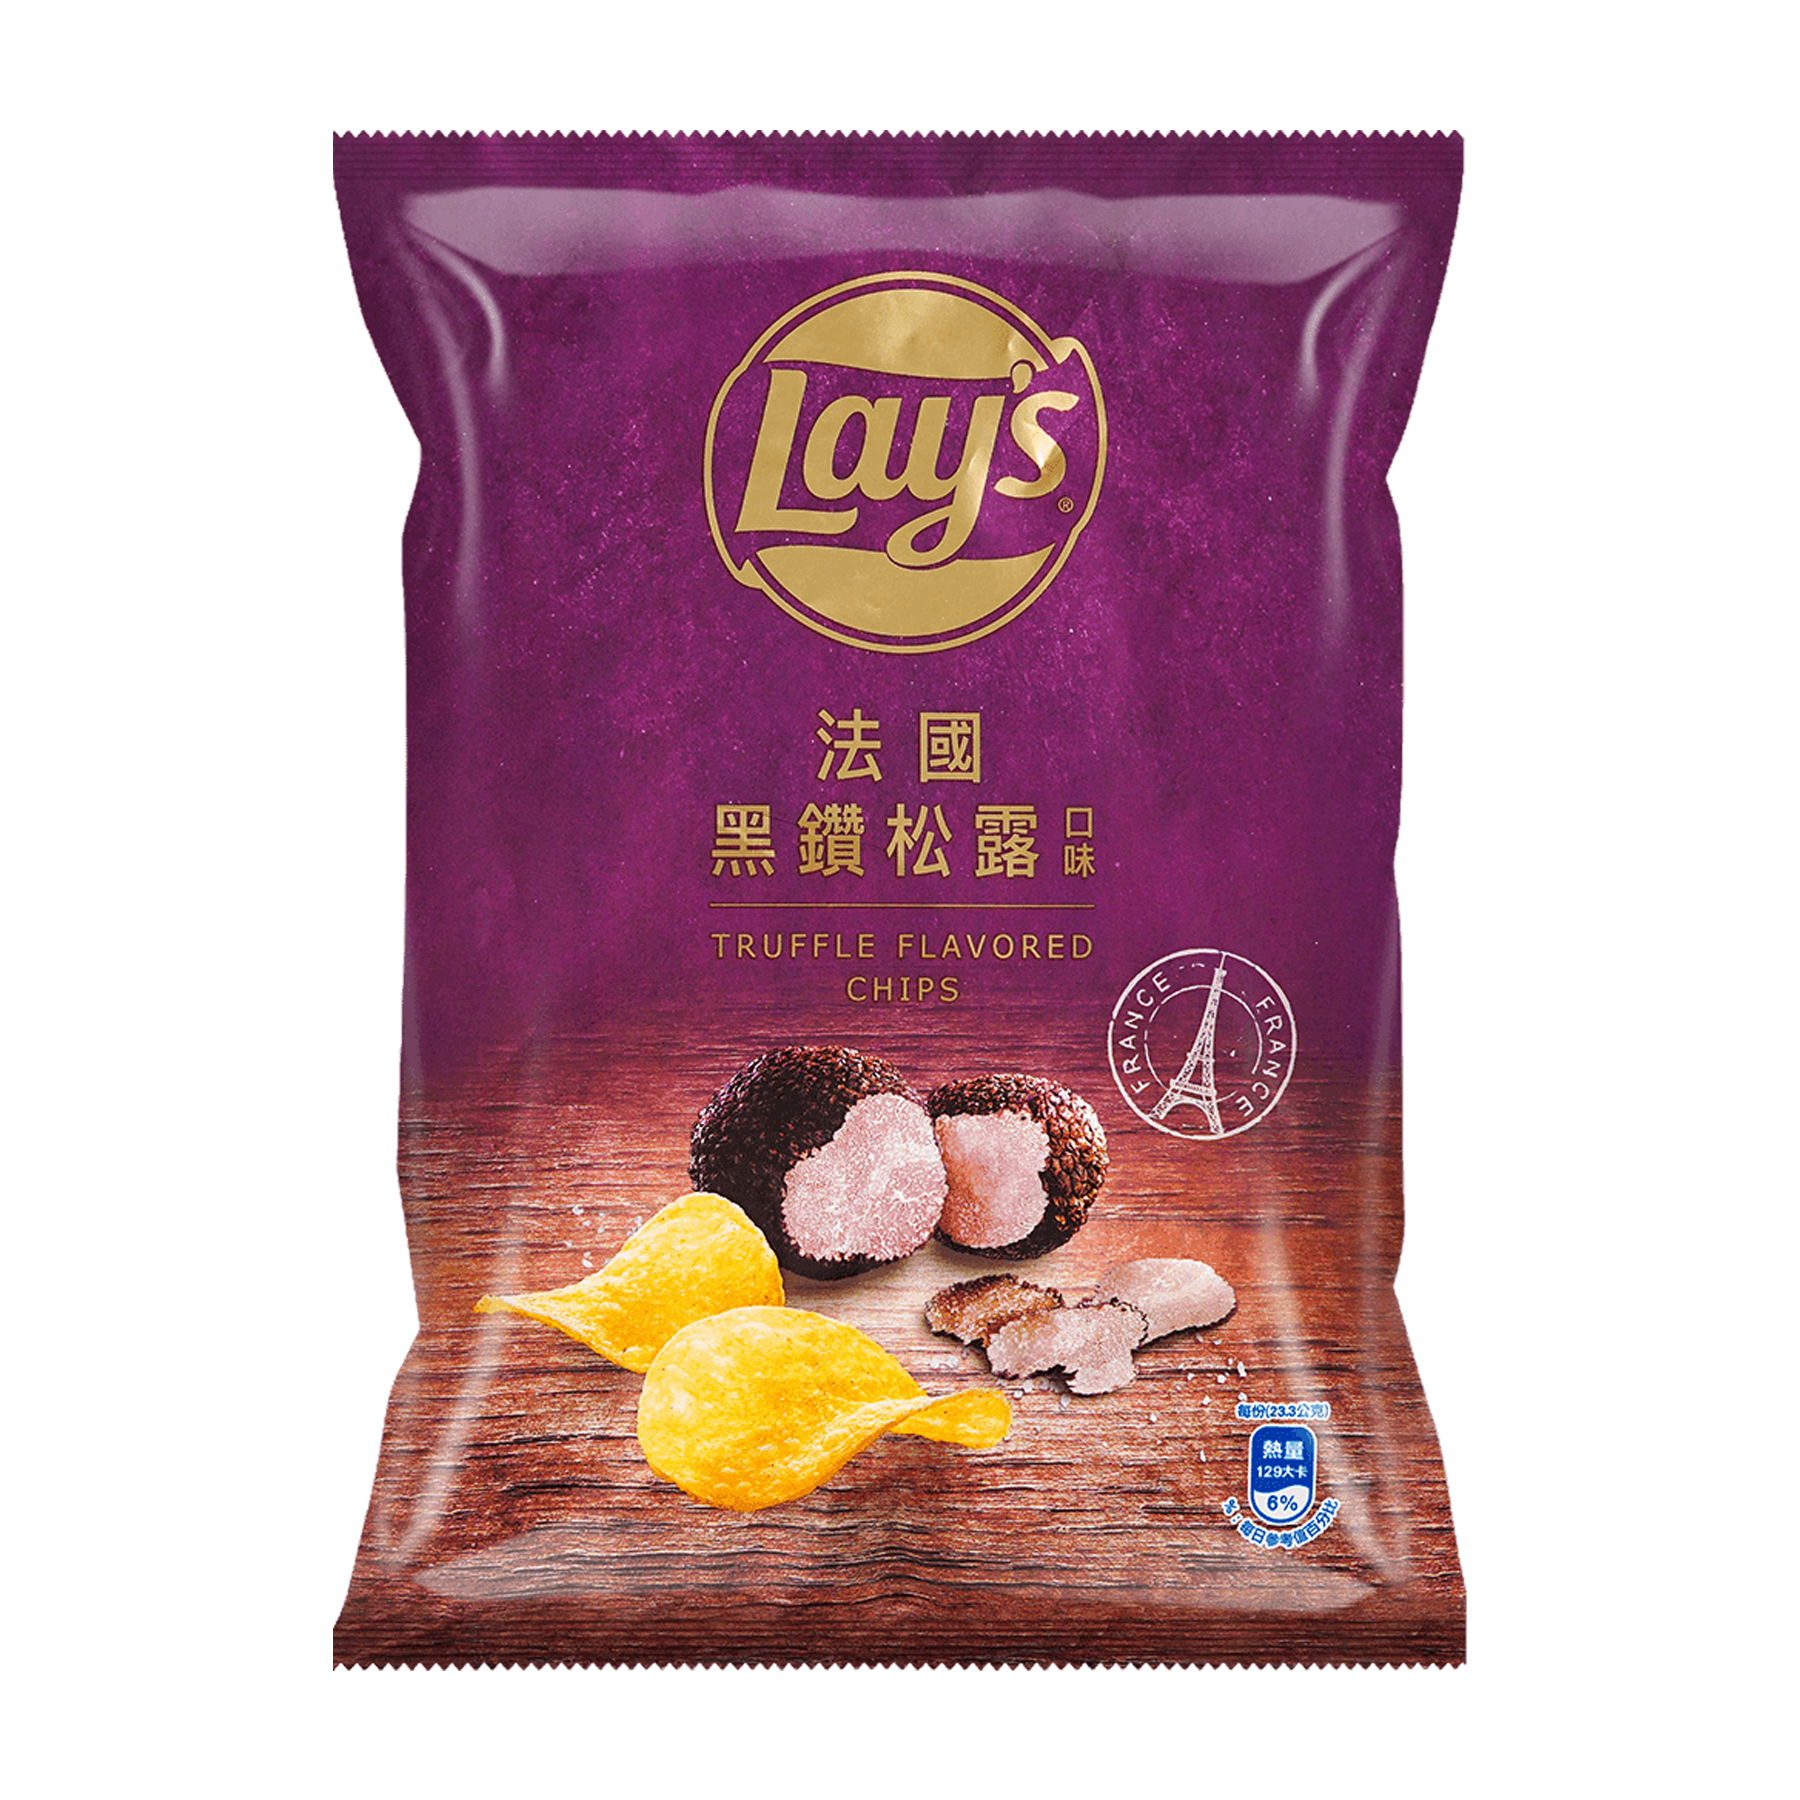 Lays Truffle Flavored Chips (70G)